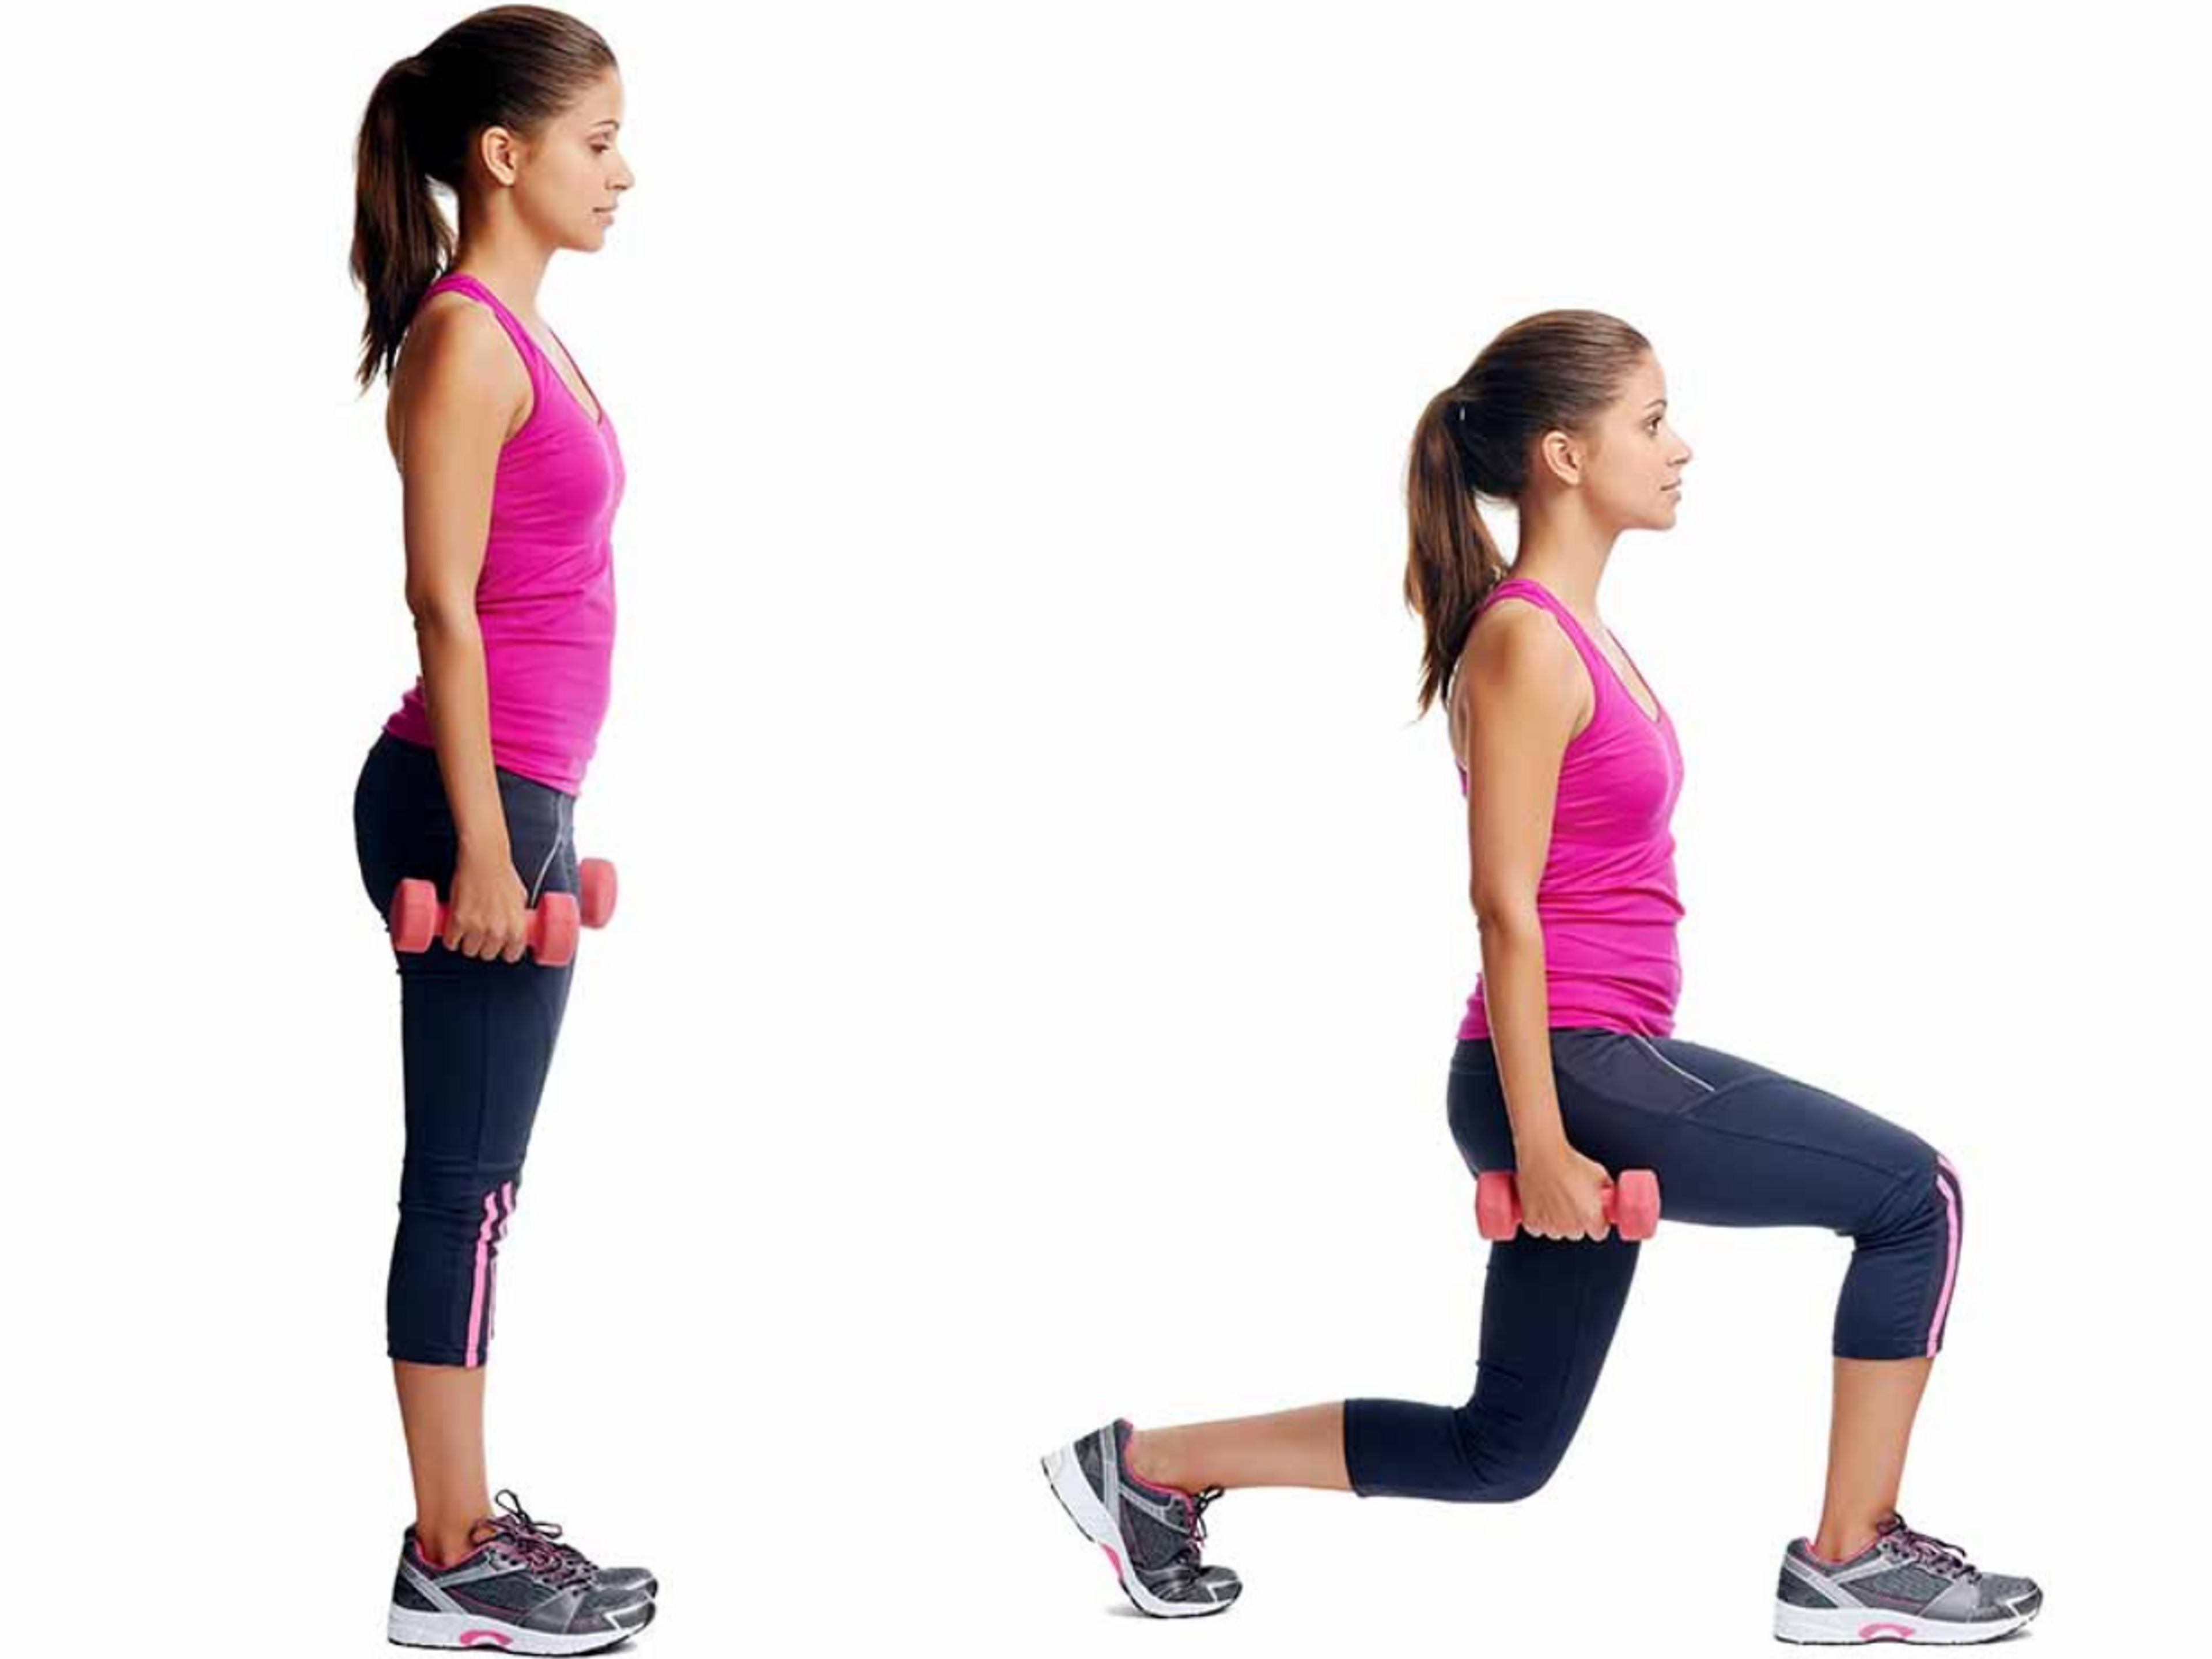 Lunge with weight exercise for meniscal tear